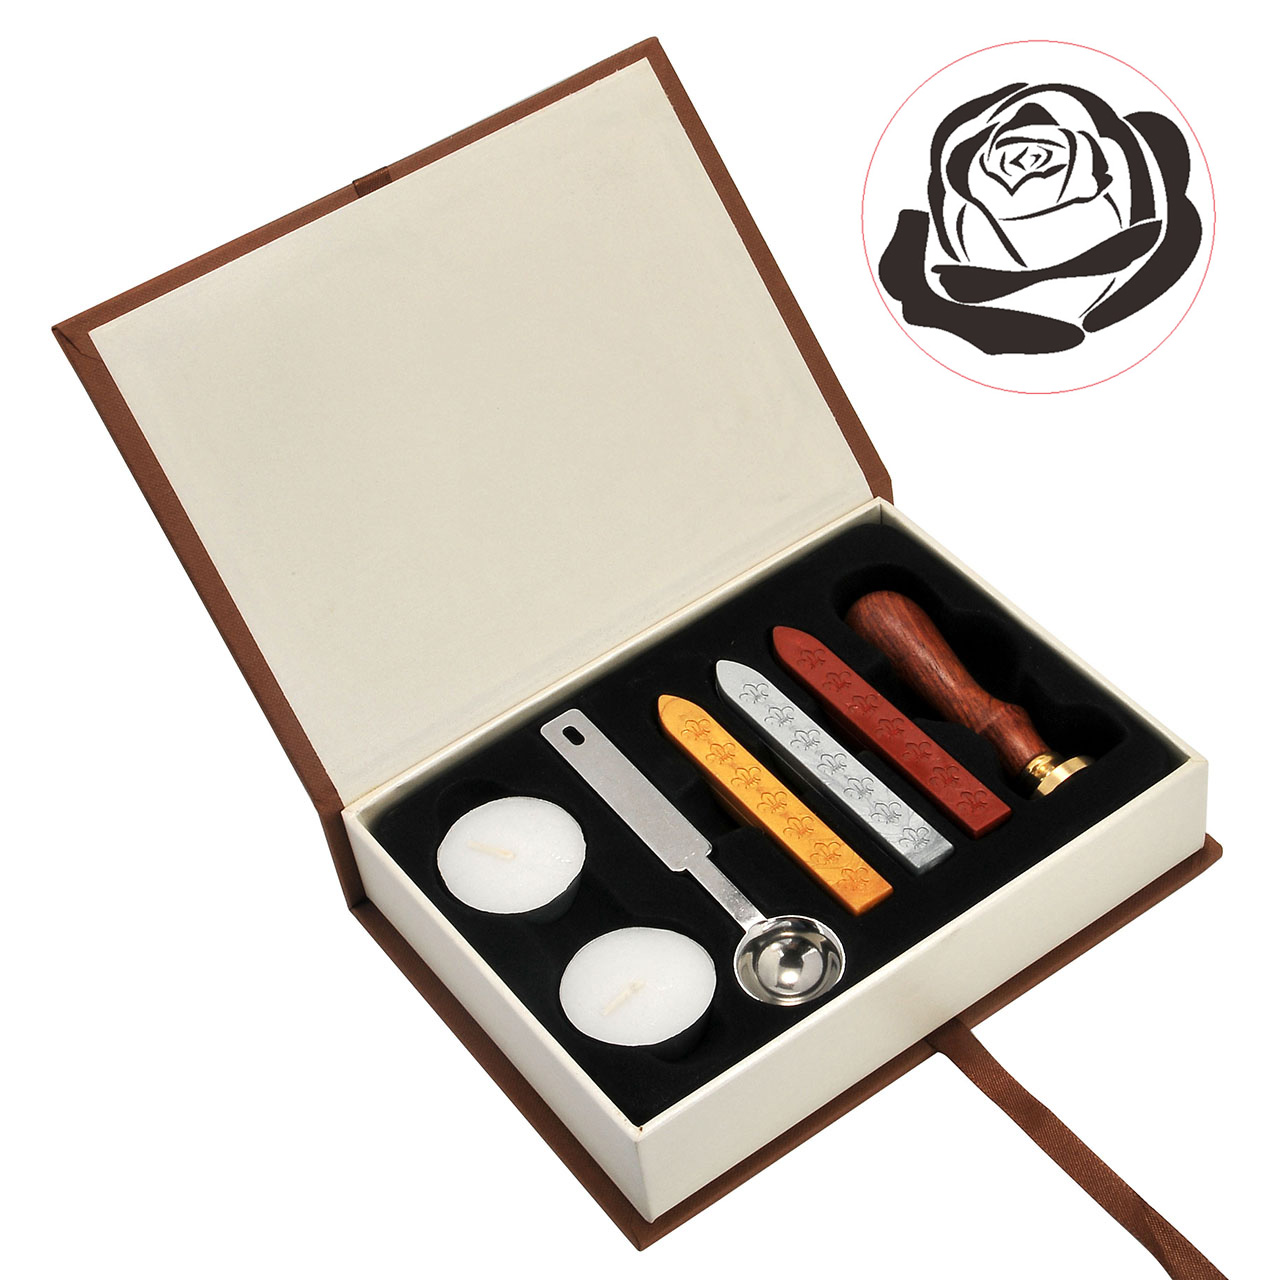 The Rose Wax Seal Stamp Set, Yoption Classic Vintage Seal Wax Stamp Set, Retro Seal Stamps Maker Gift Box Set (The Rose #2)